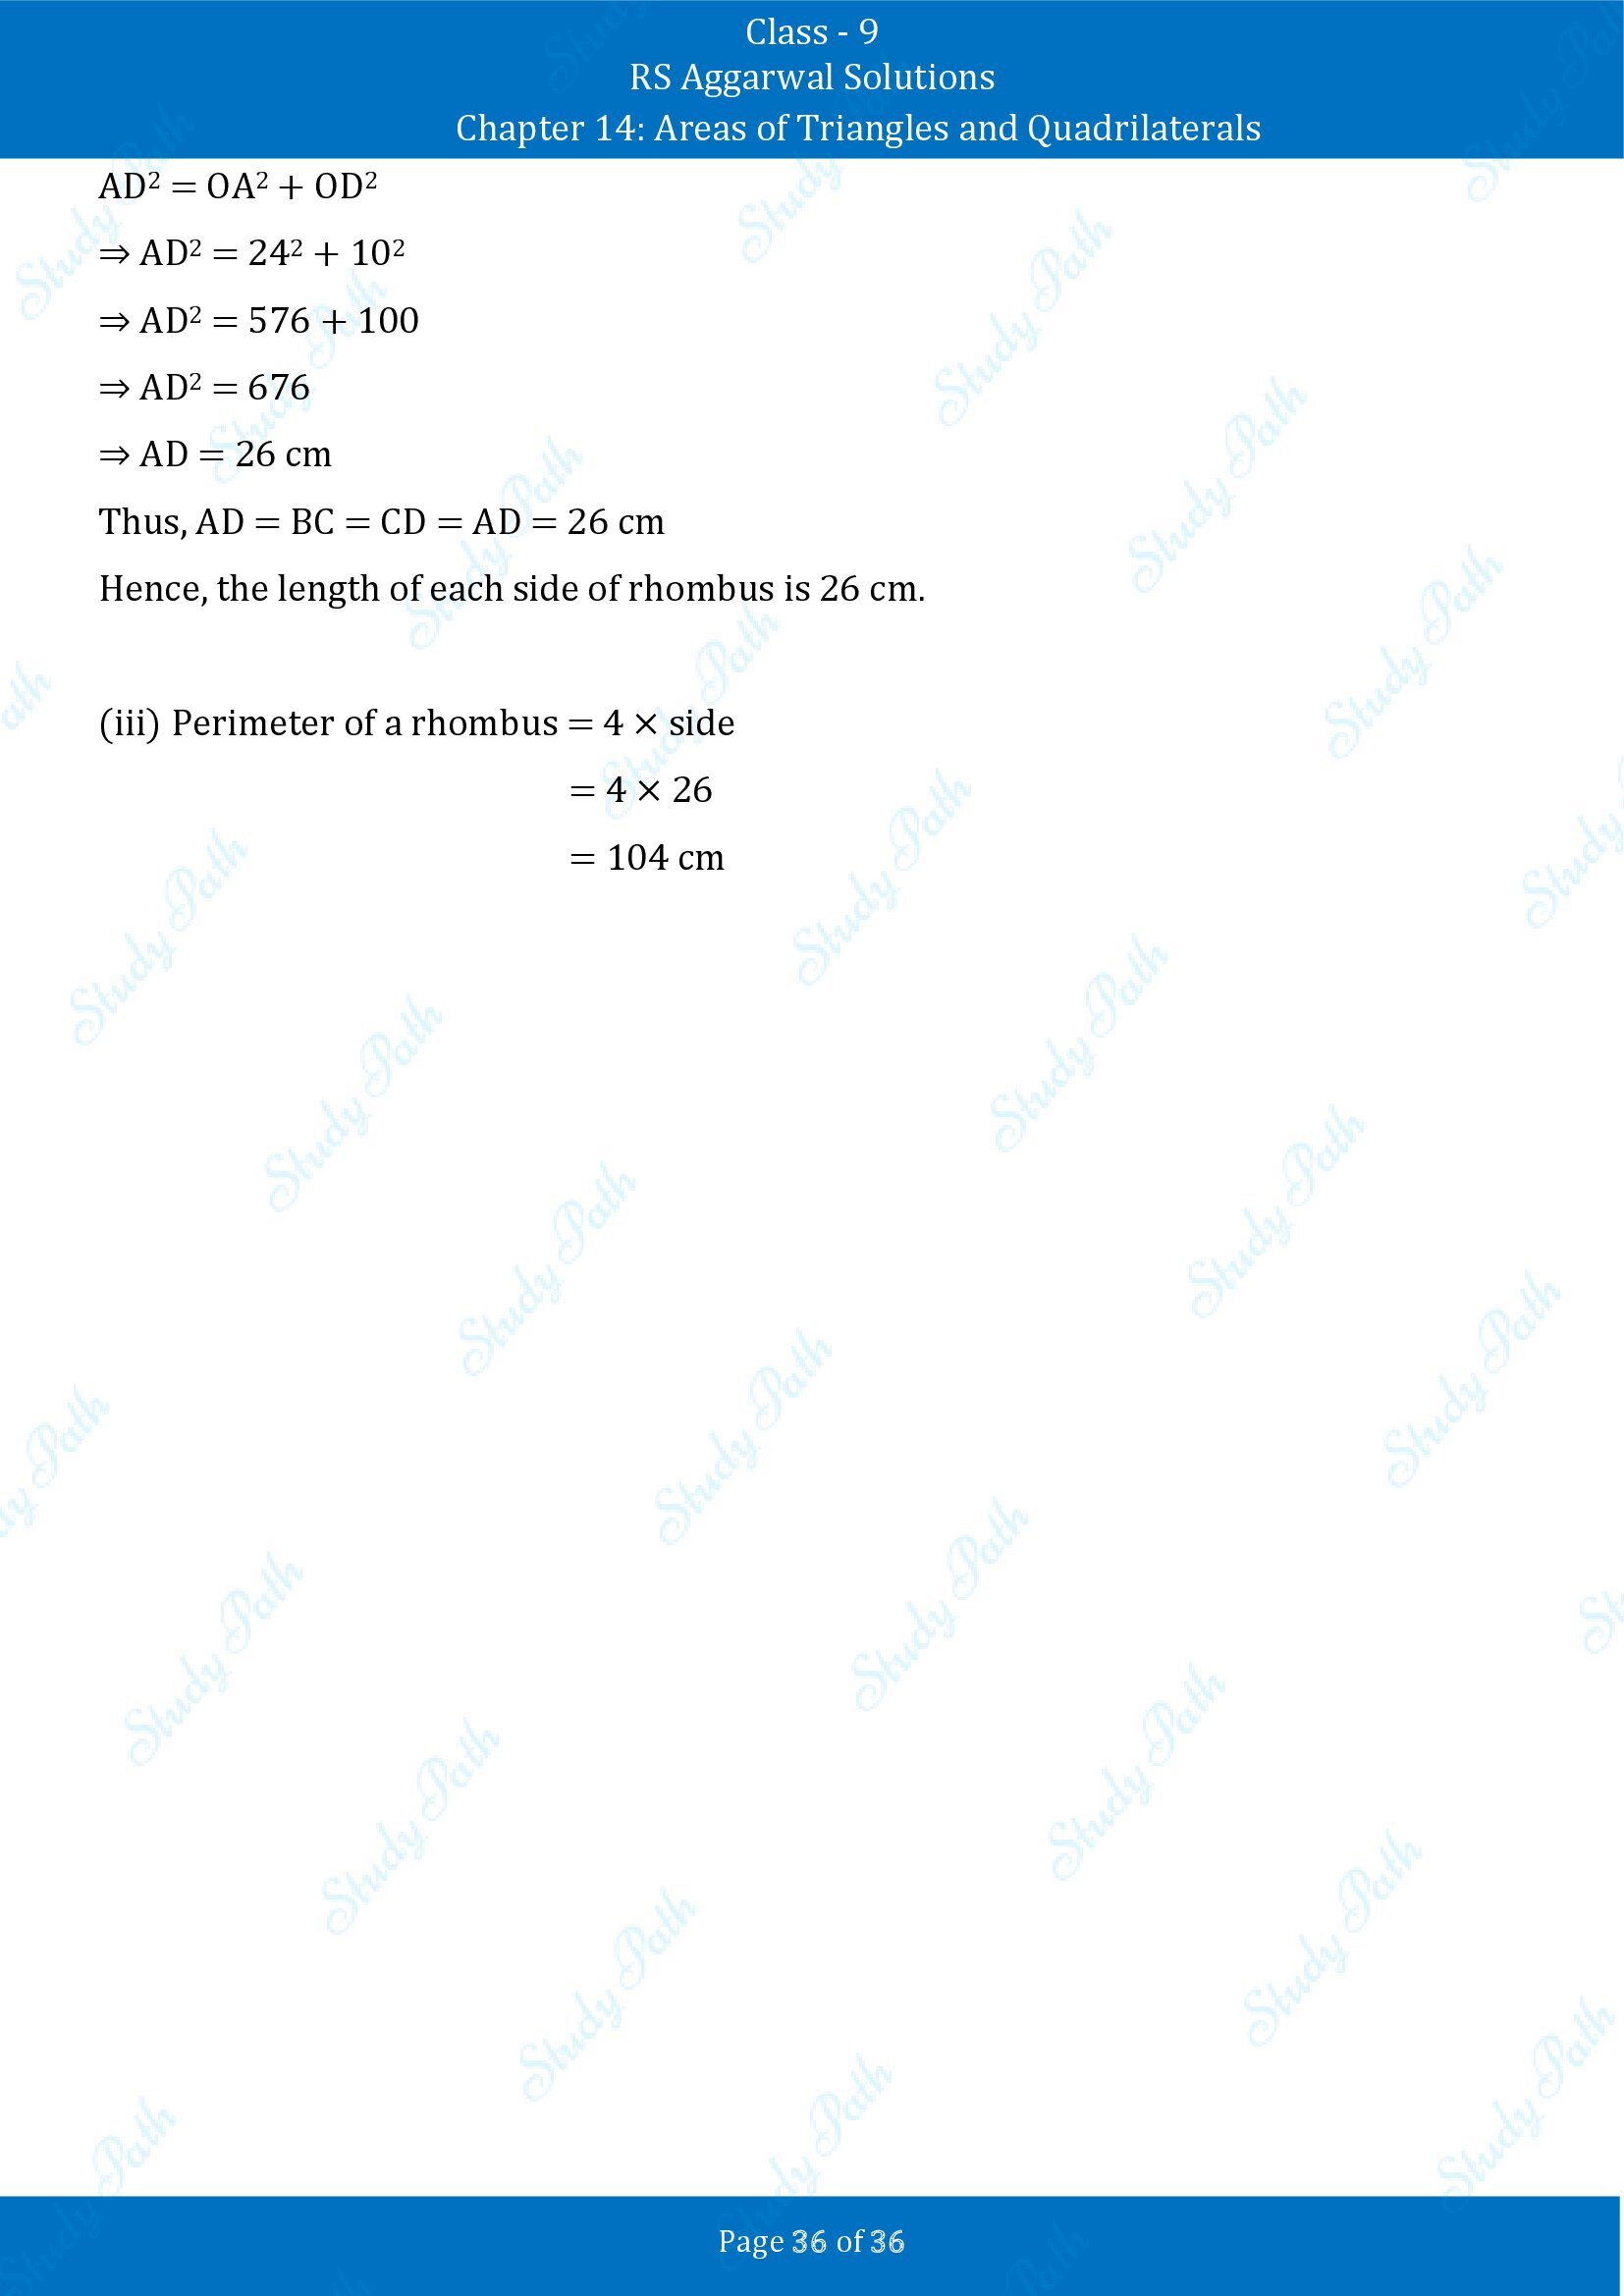 RS Aggarwal Solutions Class 9 Chapter 14 Areas of Triangles and Quadrilaterals Exercise 14 00036